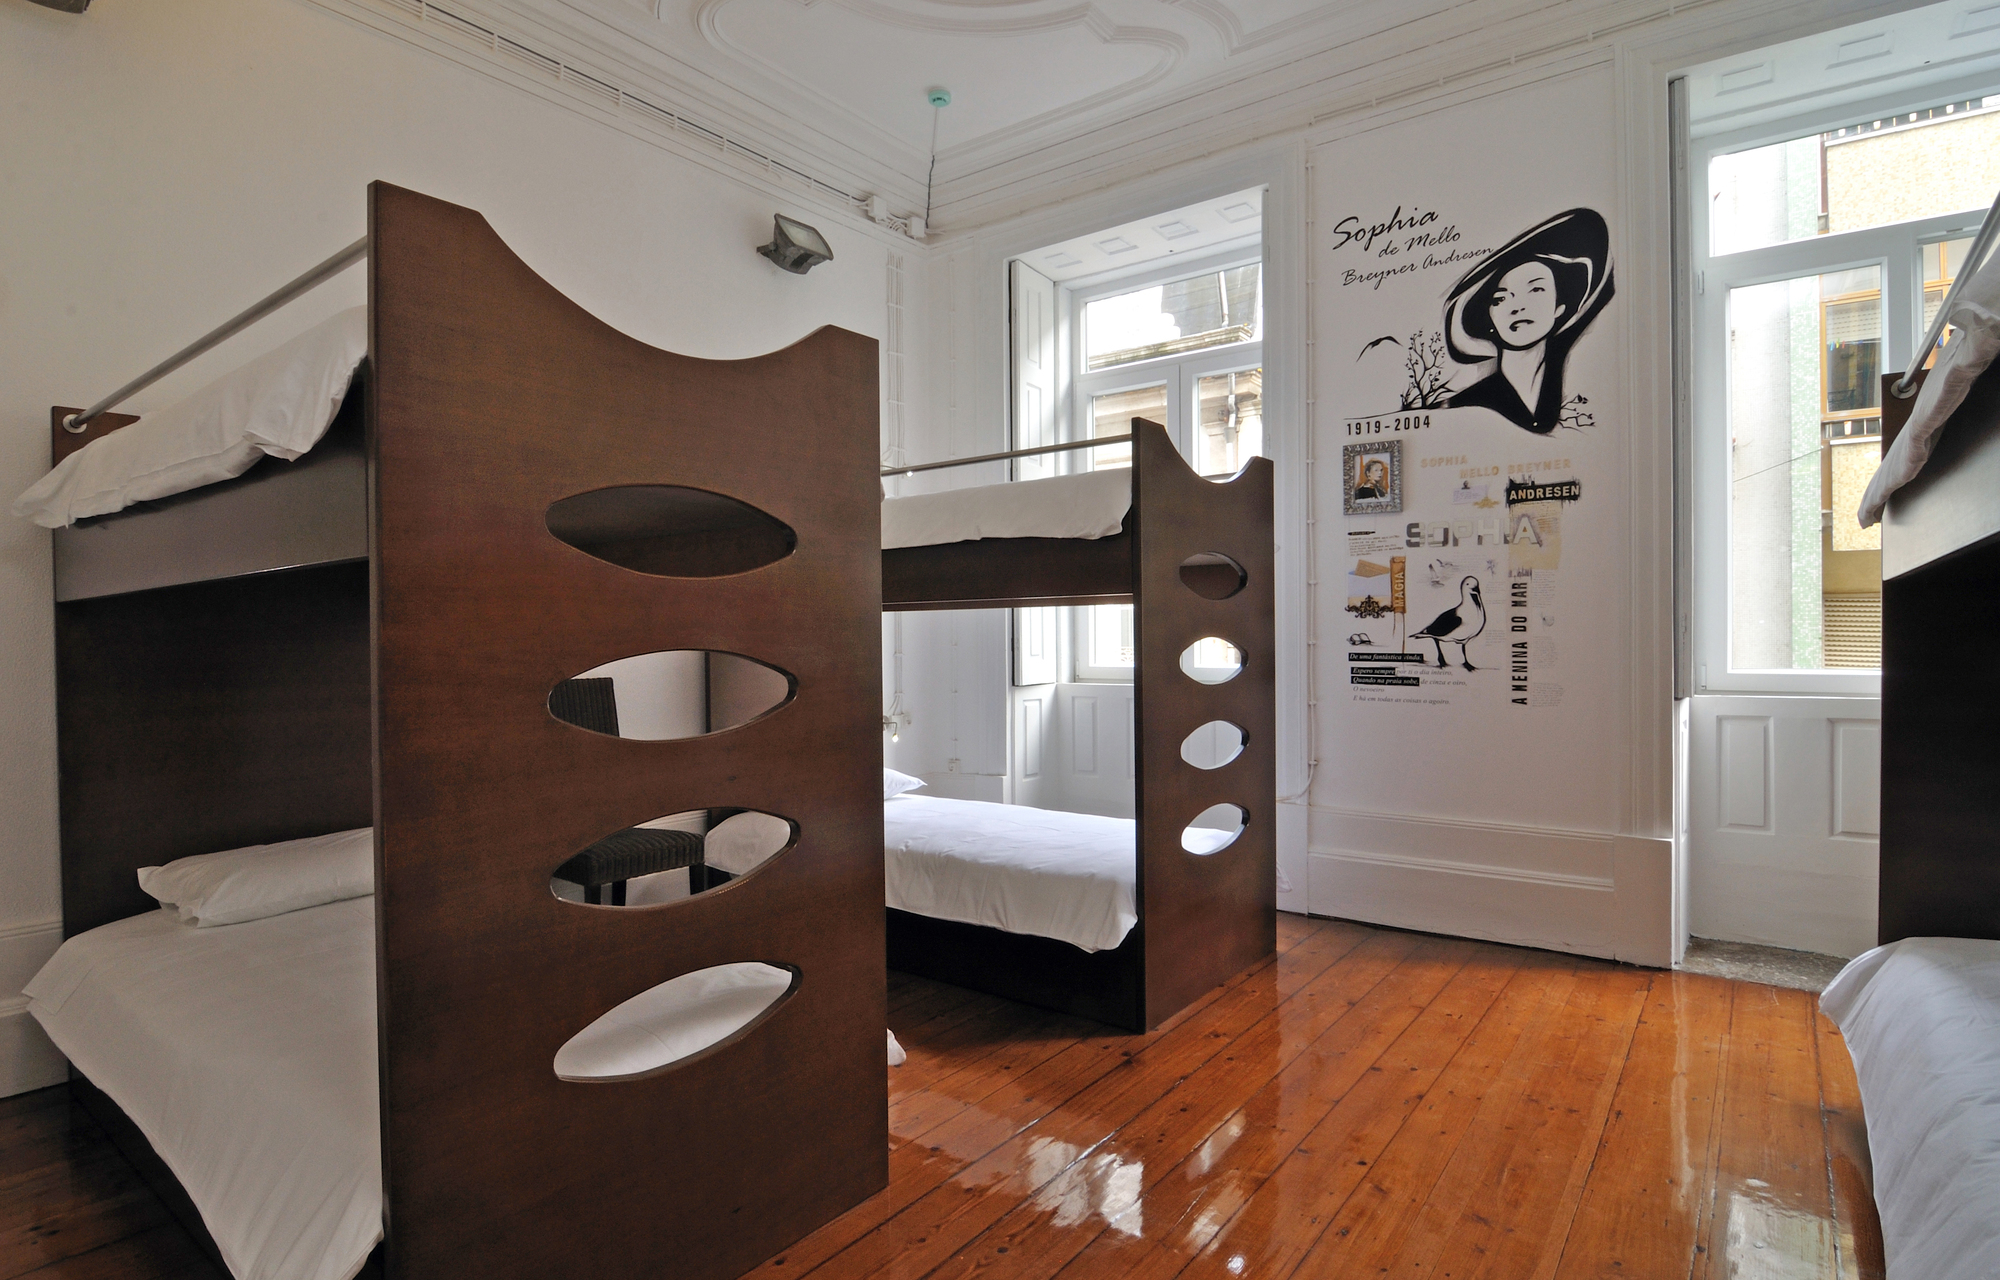 A six-bed dorm room at the Gallery Hostel.